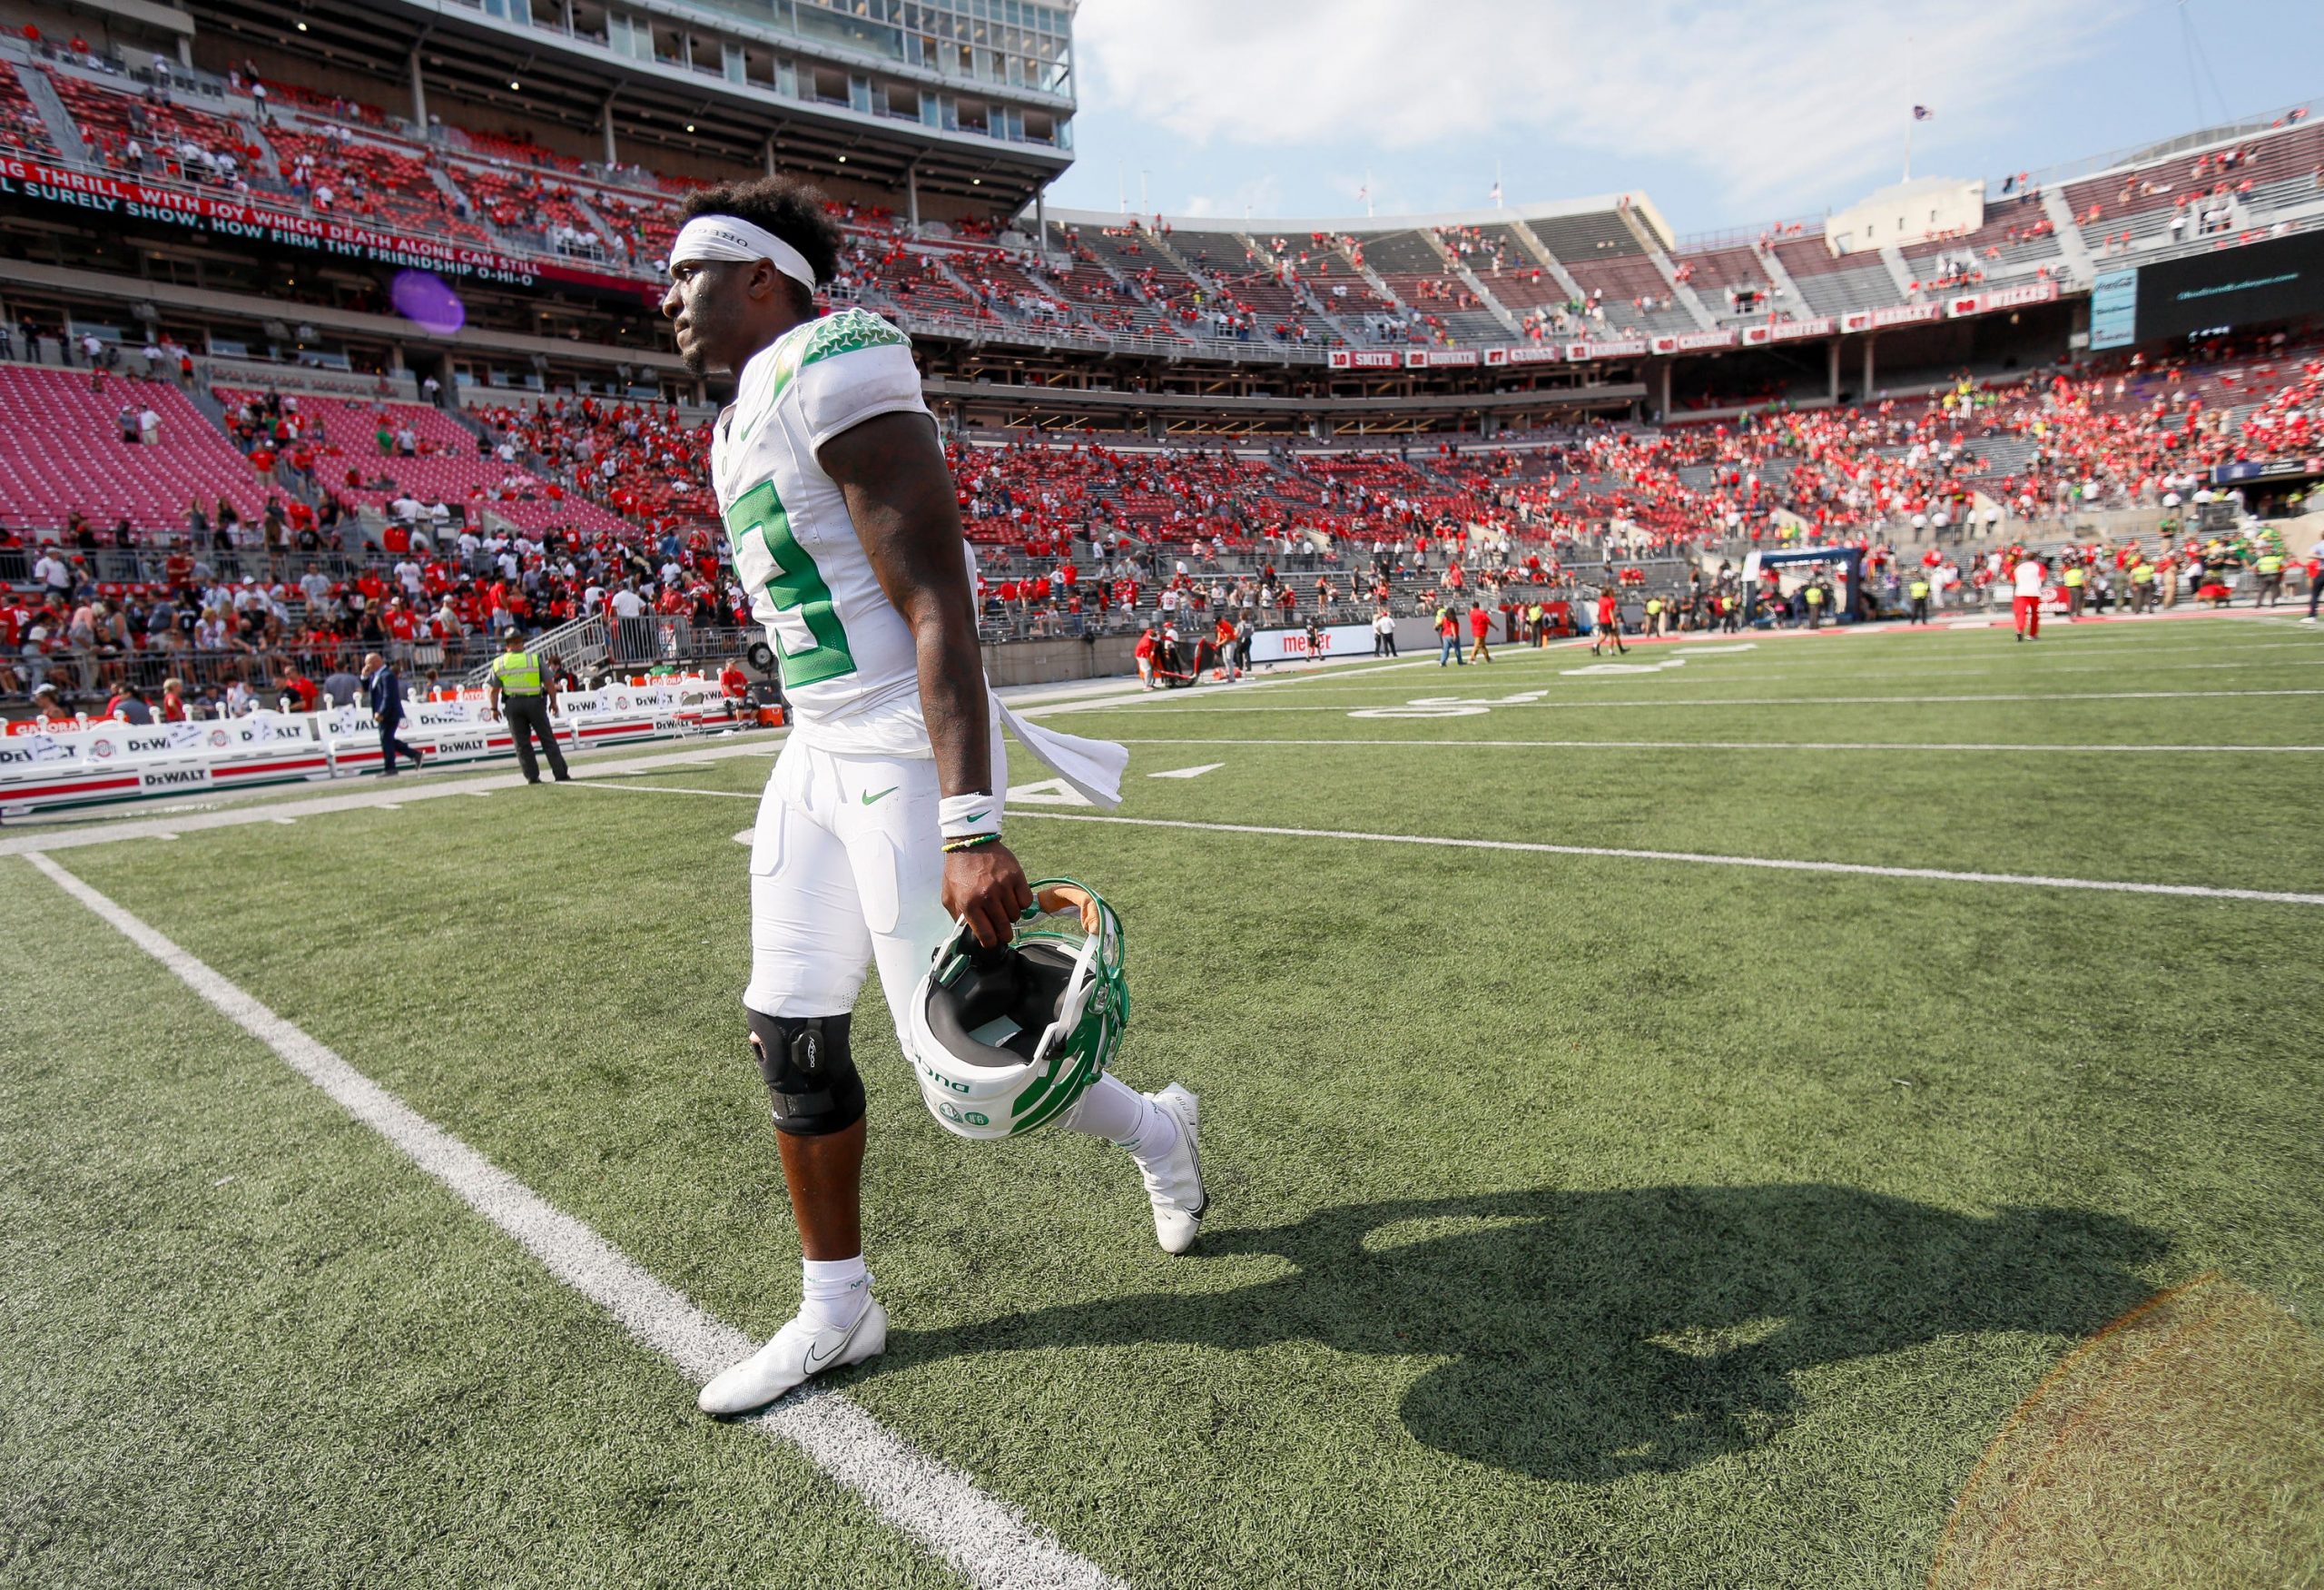 Oregon Ducks quarterback Anthony Brown (13) walks off the field following the 35-28 win over the Ohio State Buckeyes in the NCAA football game at Ohio Stadium in Columbus on Saturday, Sept. 11, 2021